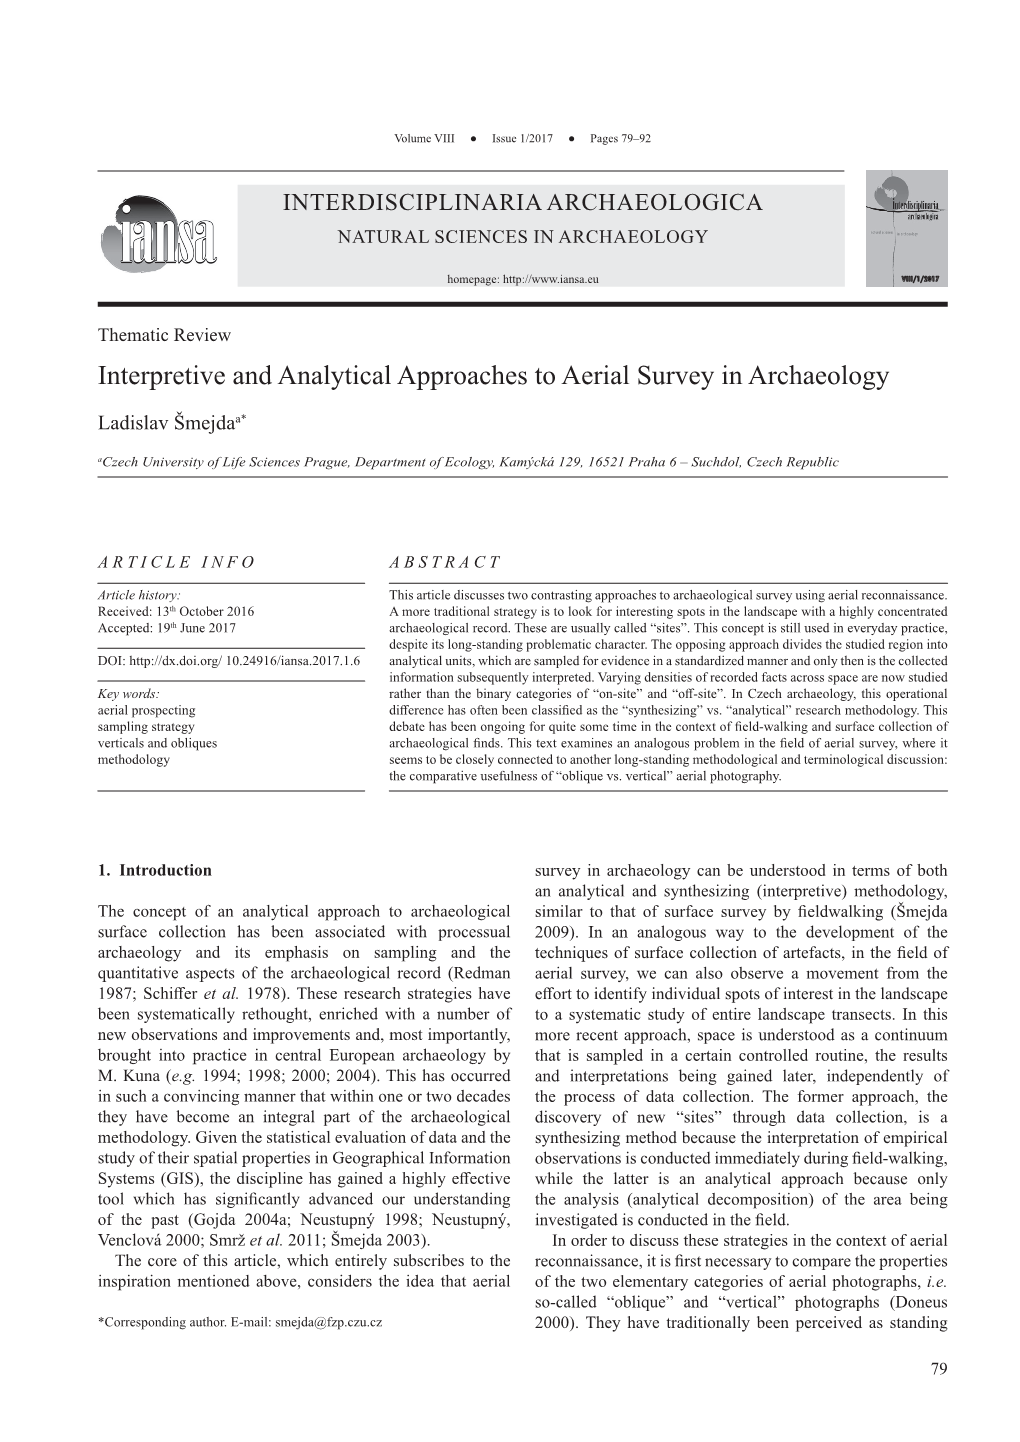 Interpretive and Analytical Approaches to Aerial Survey in Archaeology